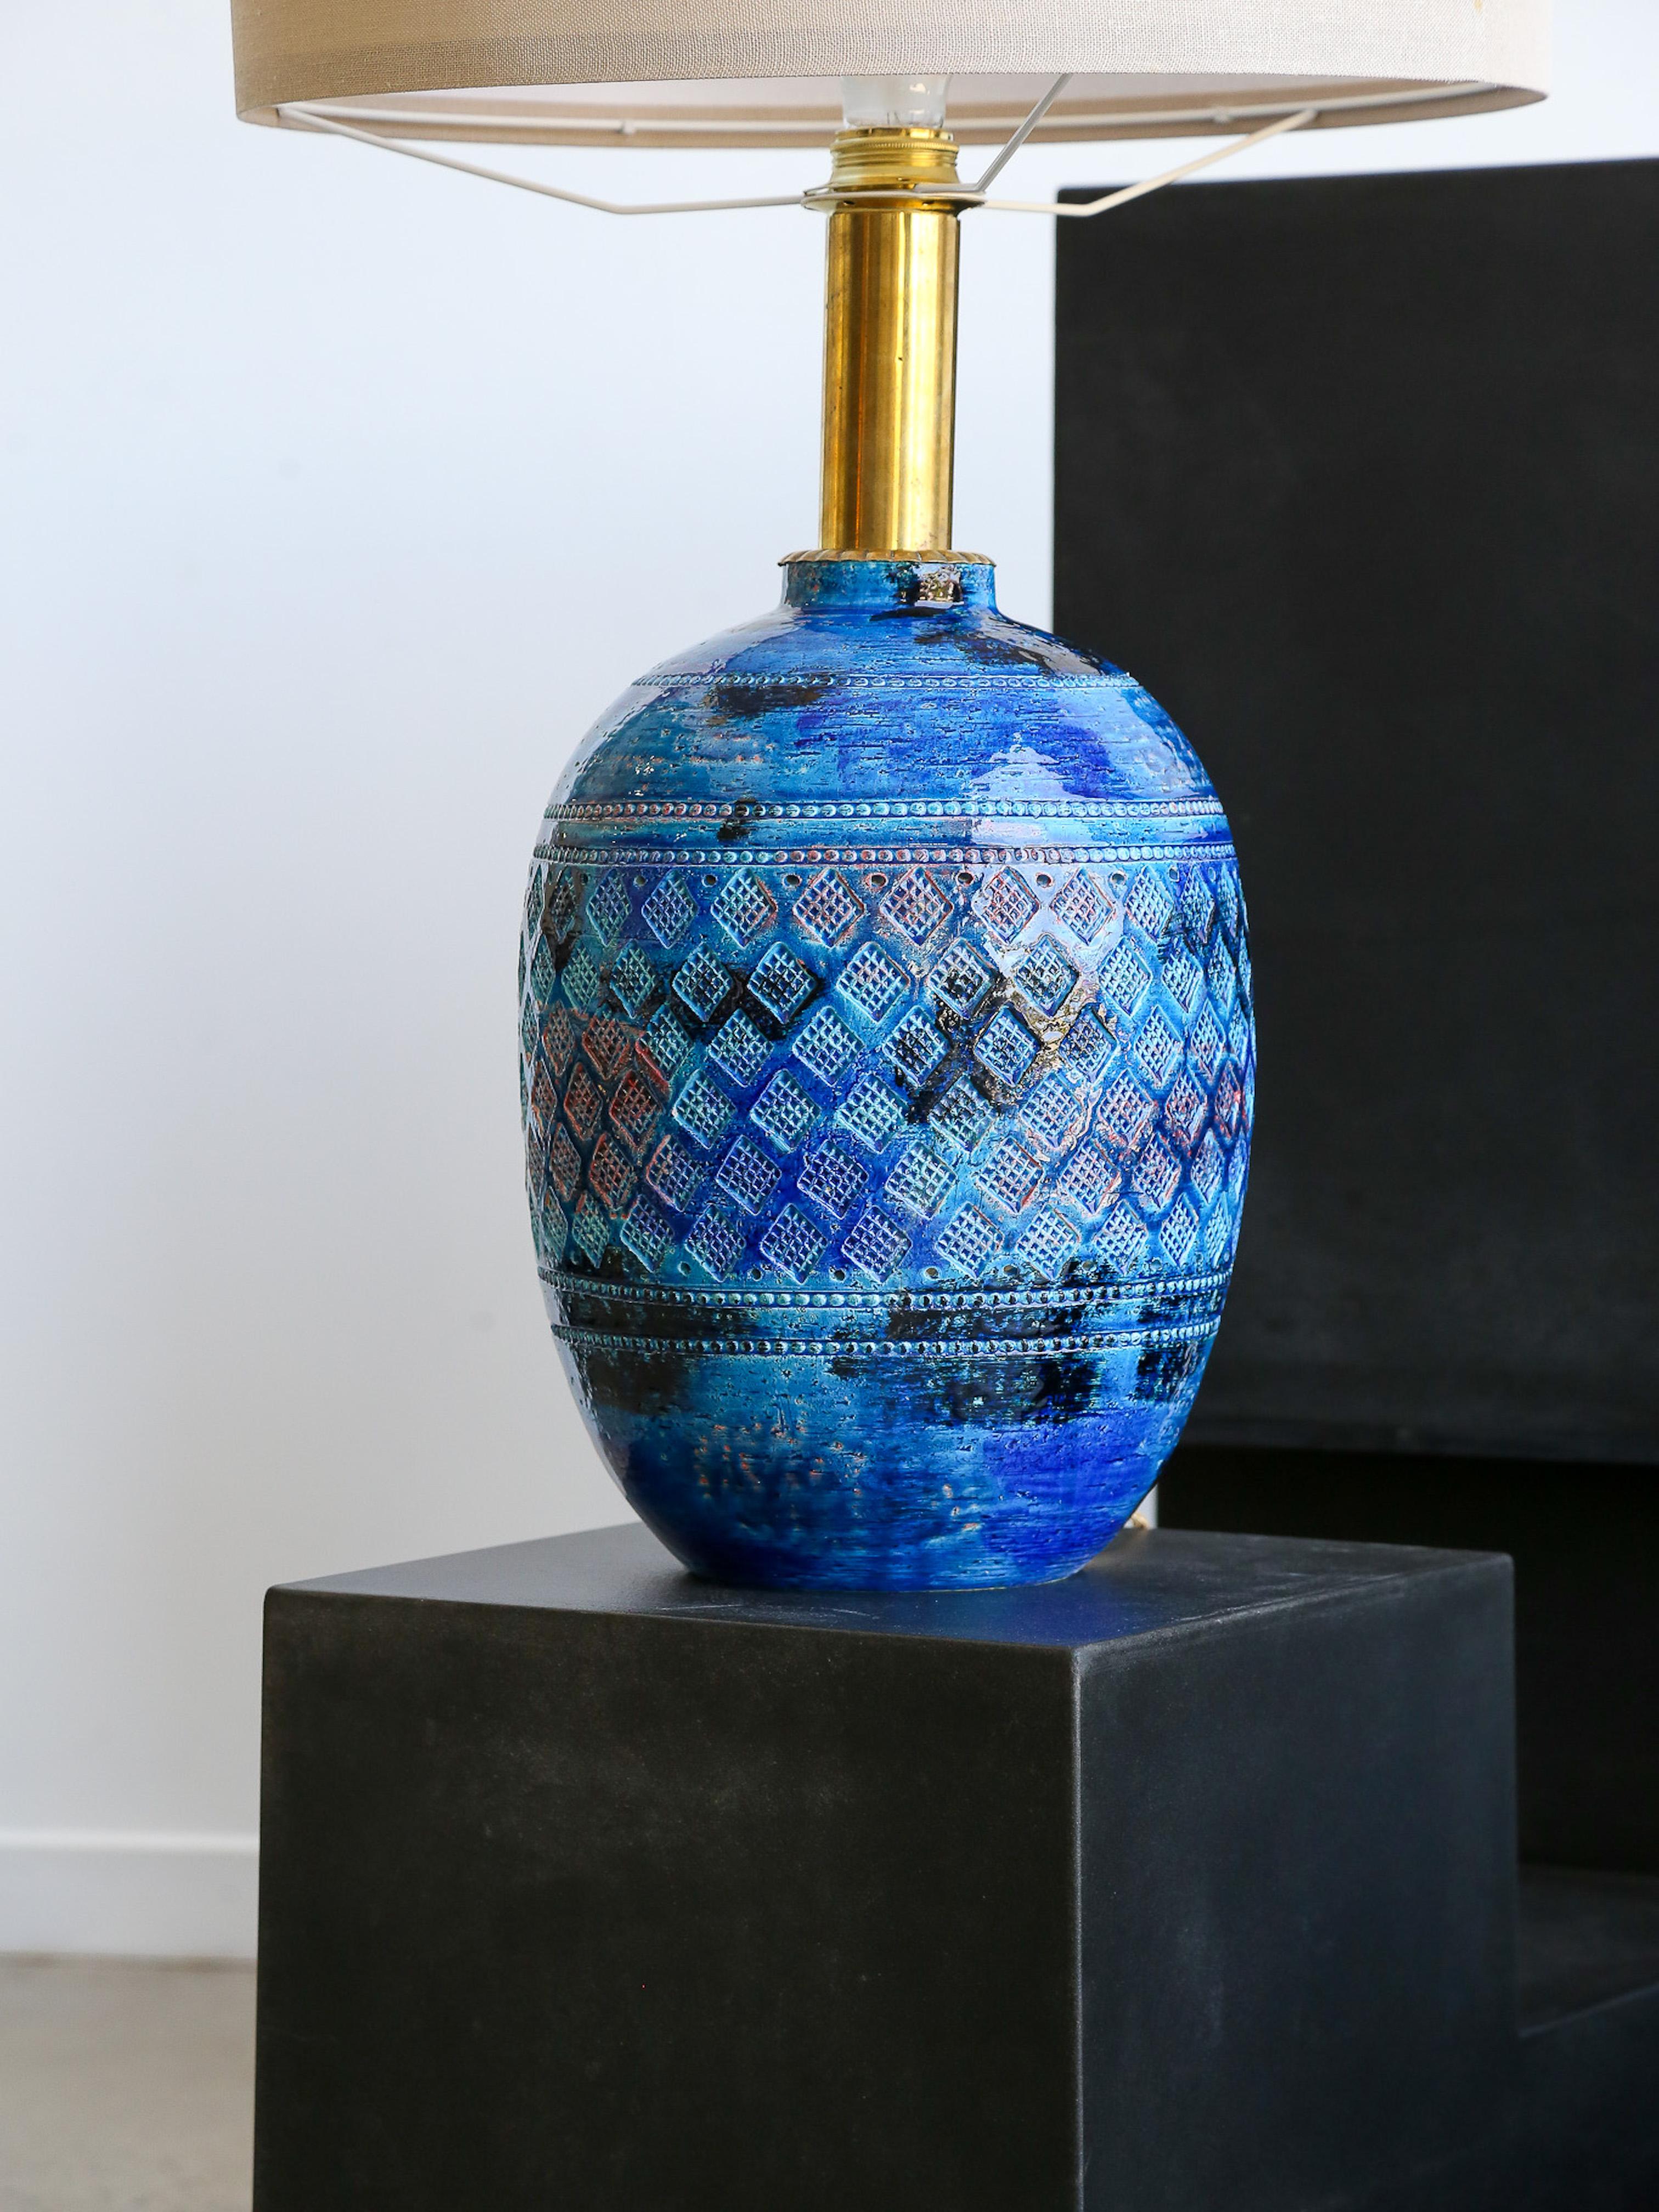 Bitossi Ceramiche is renowned for its iconic Rimini Blue glaze, and they've produced various items with this distinctive finish, including table lamps. The Bitossi Rimini Blue table lamp typically features a ceramic base with the Rimini Blue glaze,